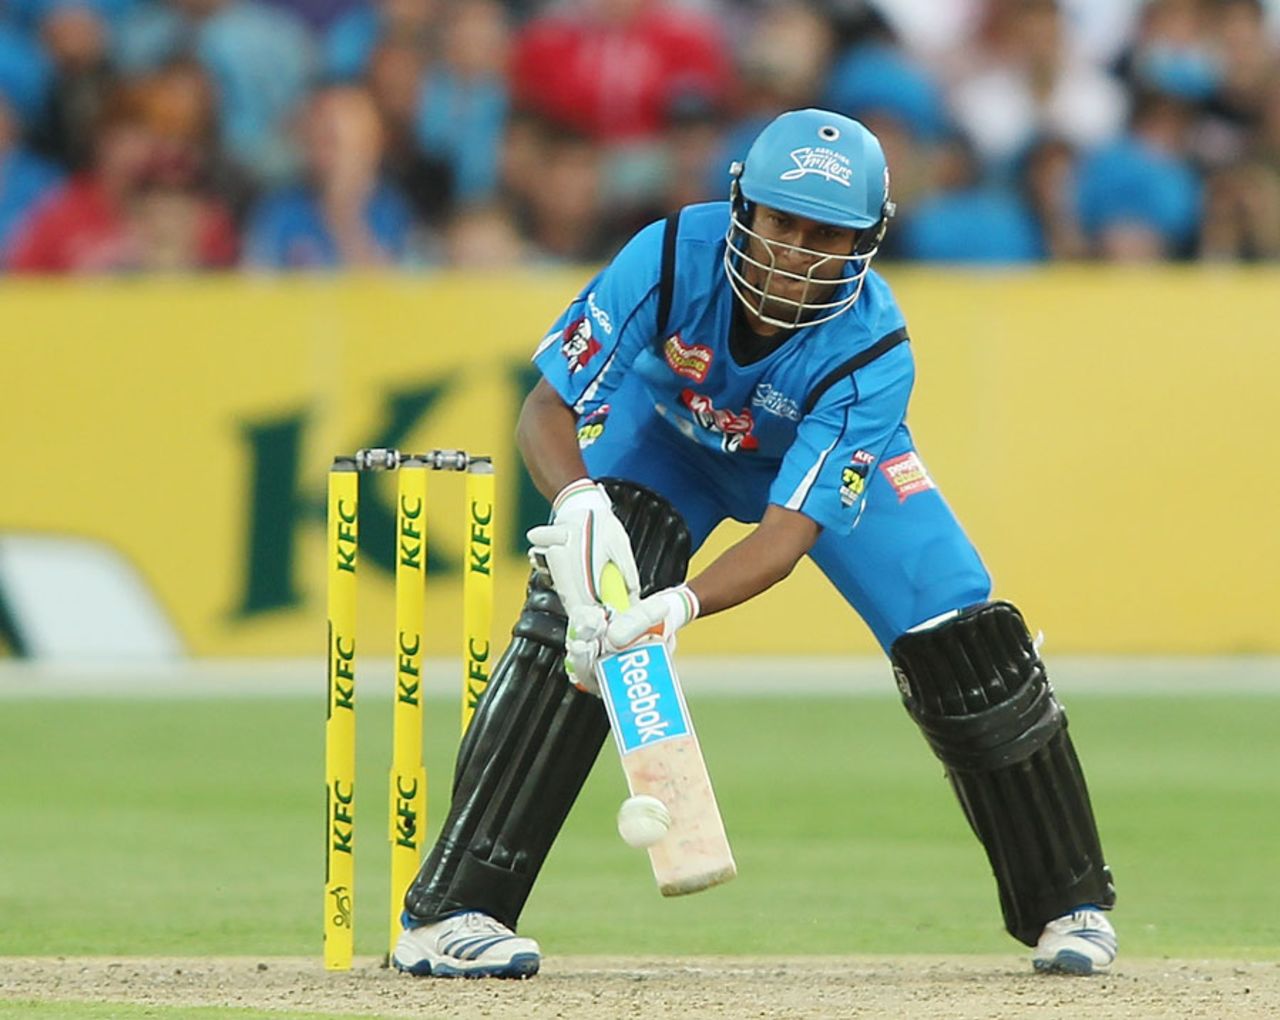 Shakib Al Hasan pulls out a scoop, Adelaide Strikers v Sydney Sixers, Big Bash League, Adelaide, January 5, 2014